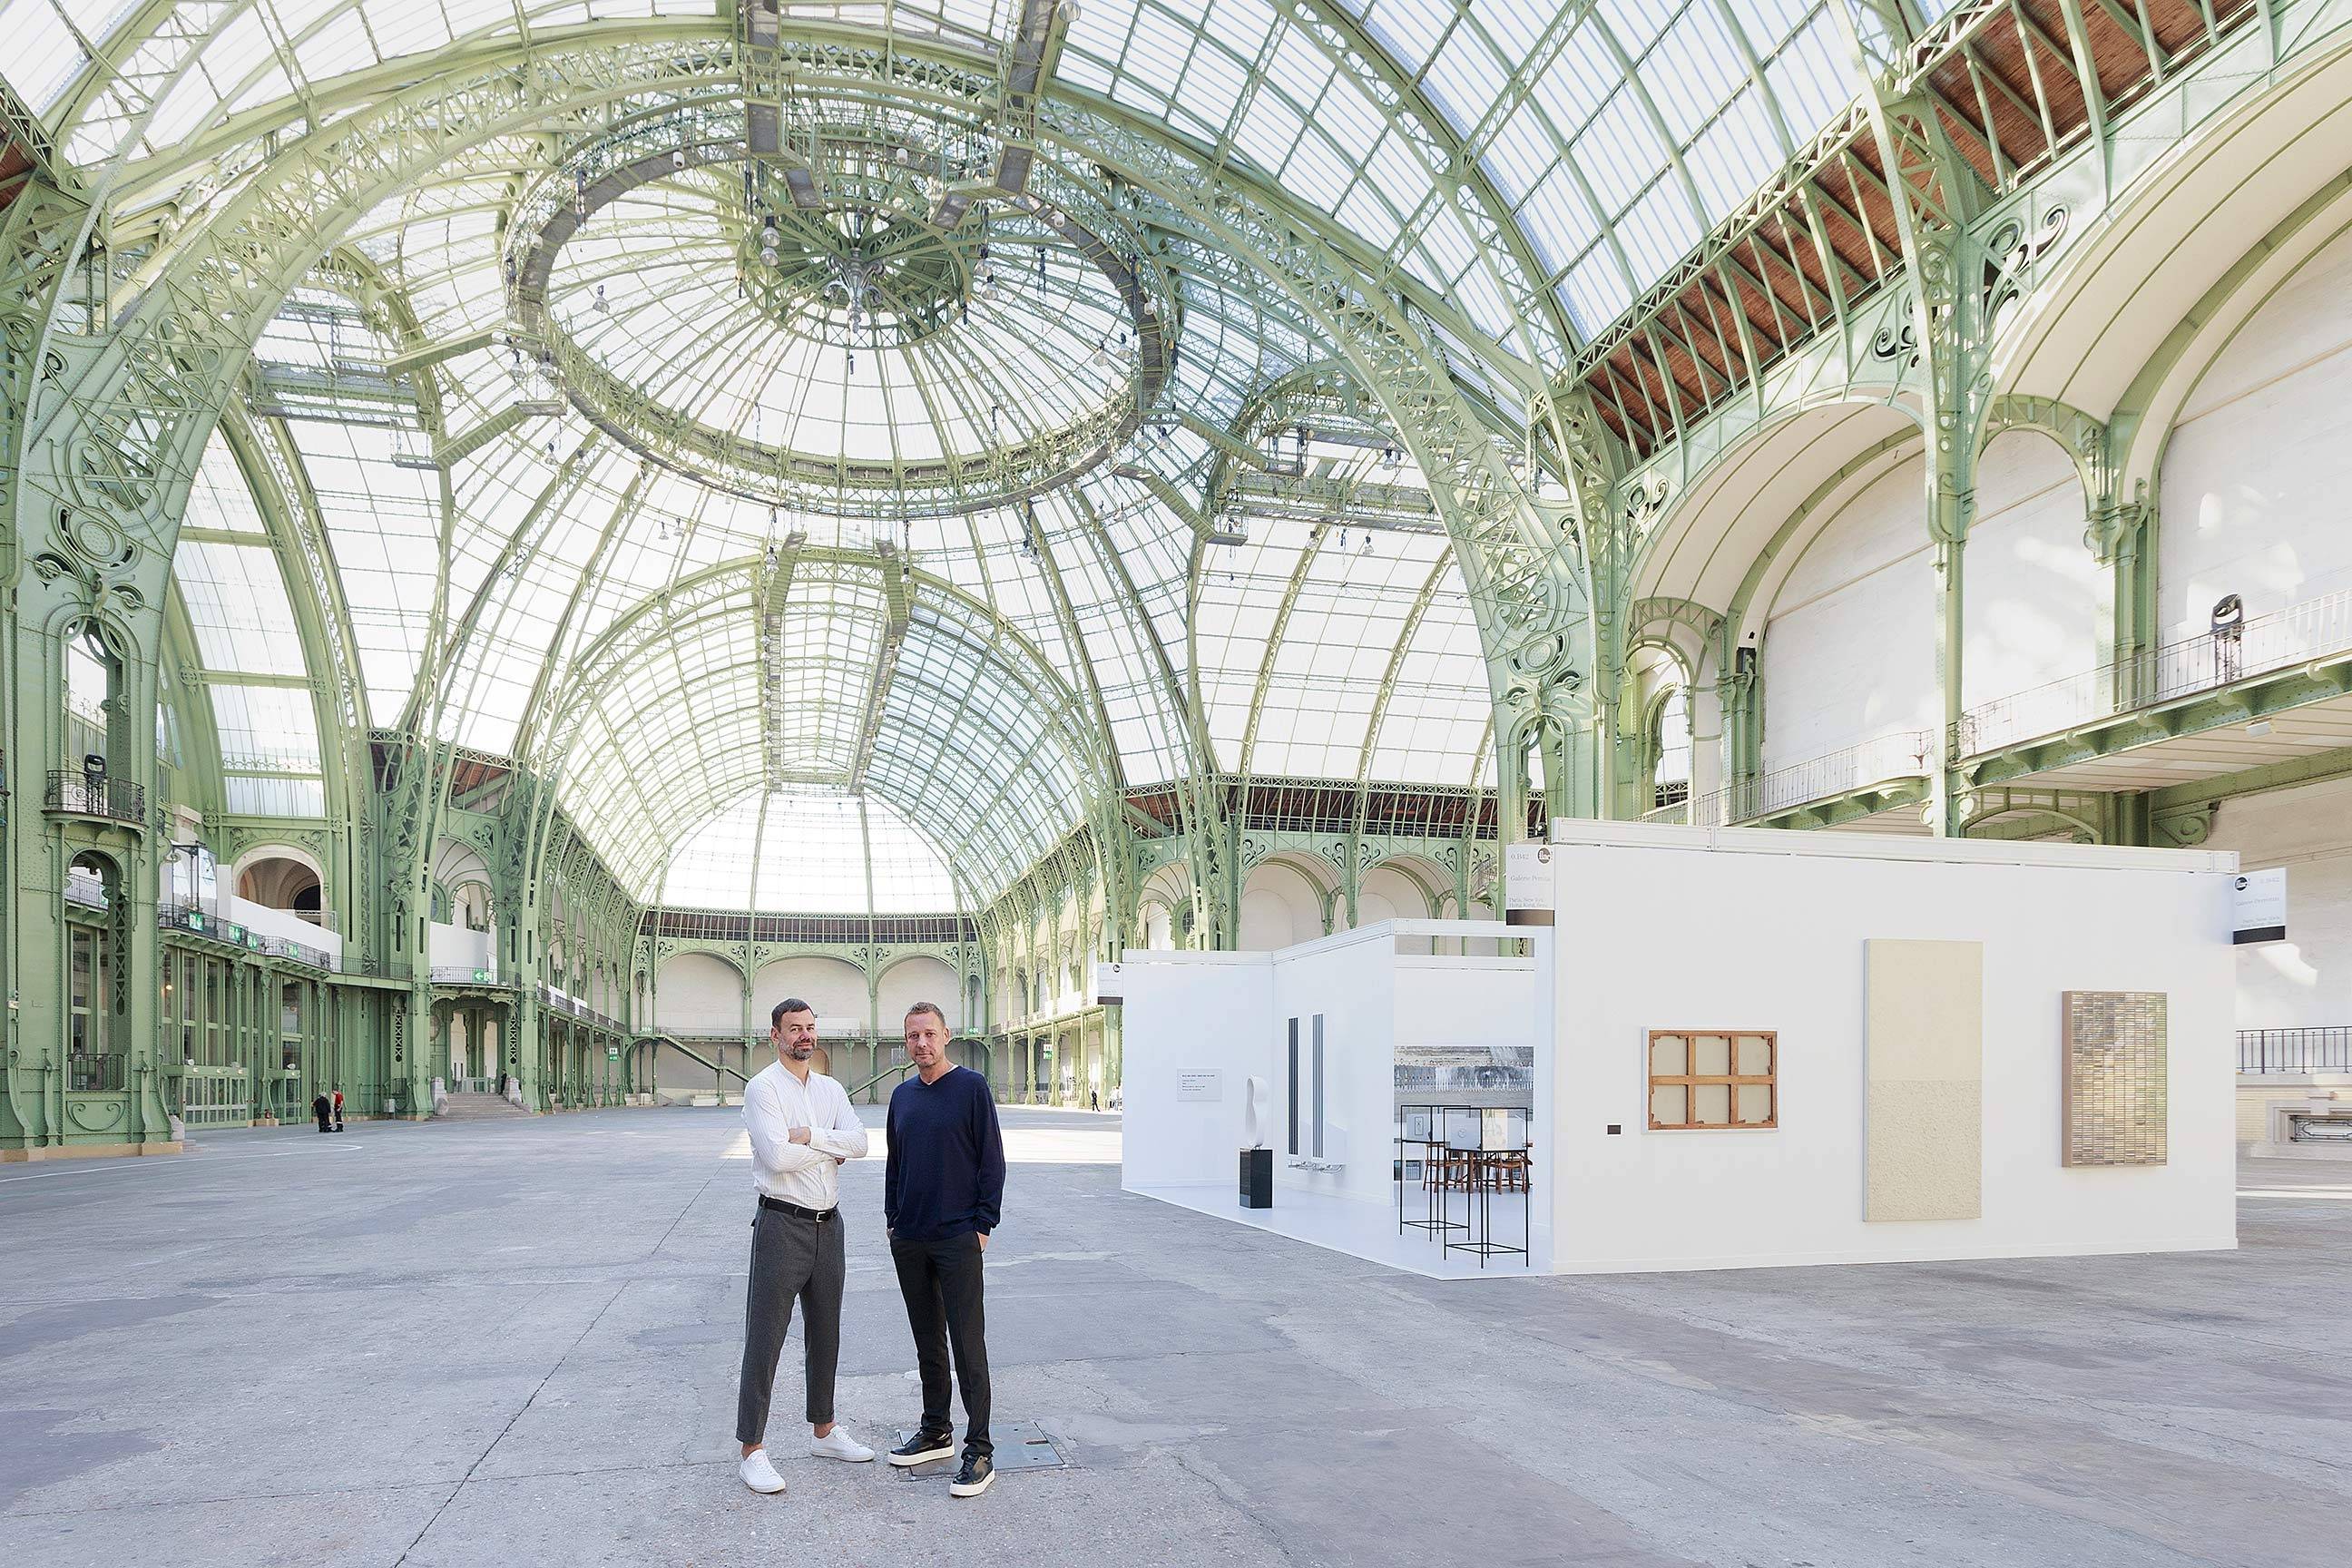 Elmgreen & Dragset portrait in front of the one-day installation Elmgreen & Dragset présentent la Galerie Perrotin au Grand Palais in Paris on Saturday, September 24th 2016.  Photo: Claire Dorn, courtesy Galerie Perrotin